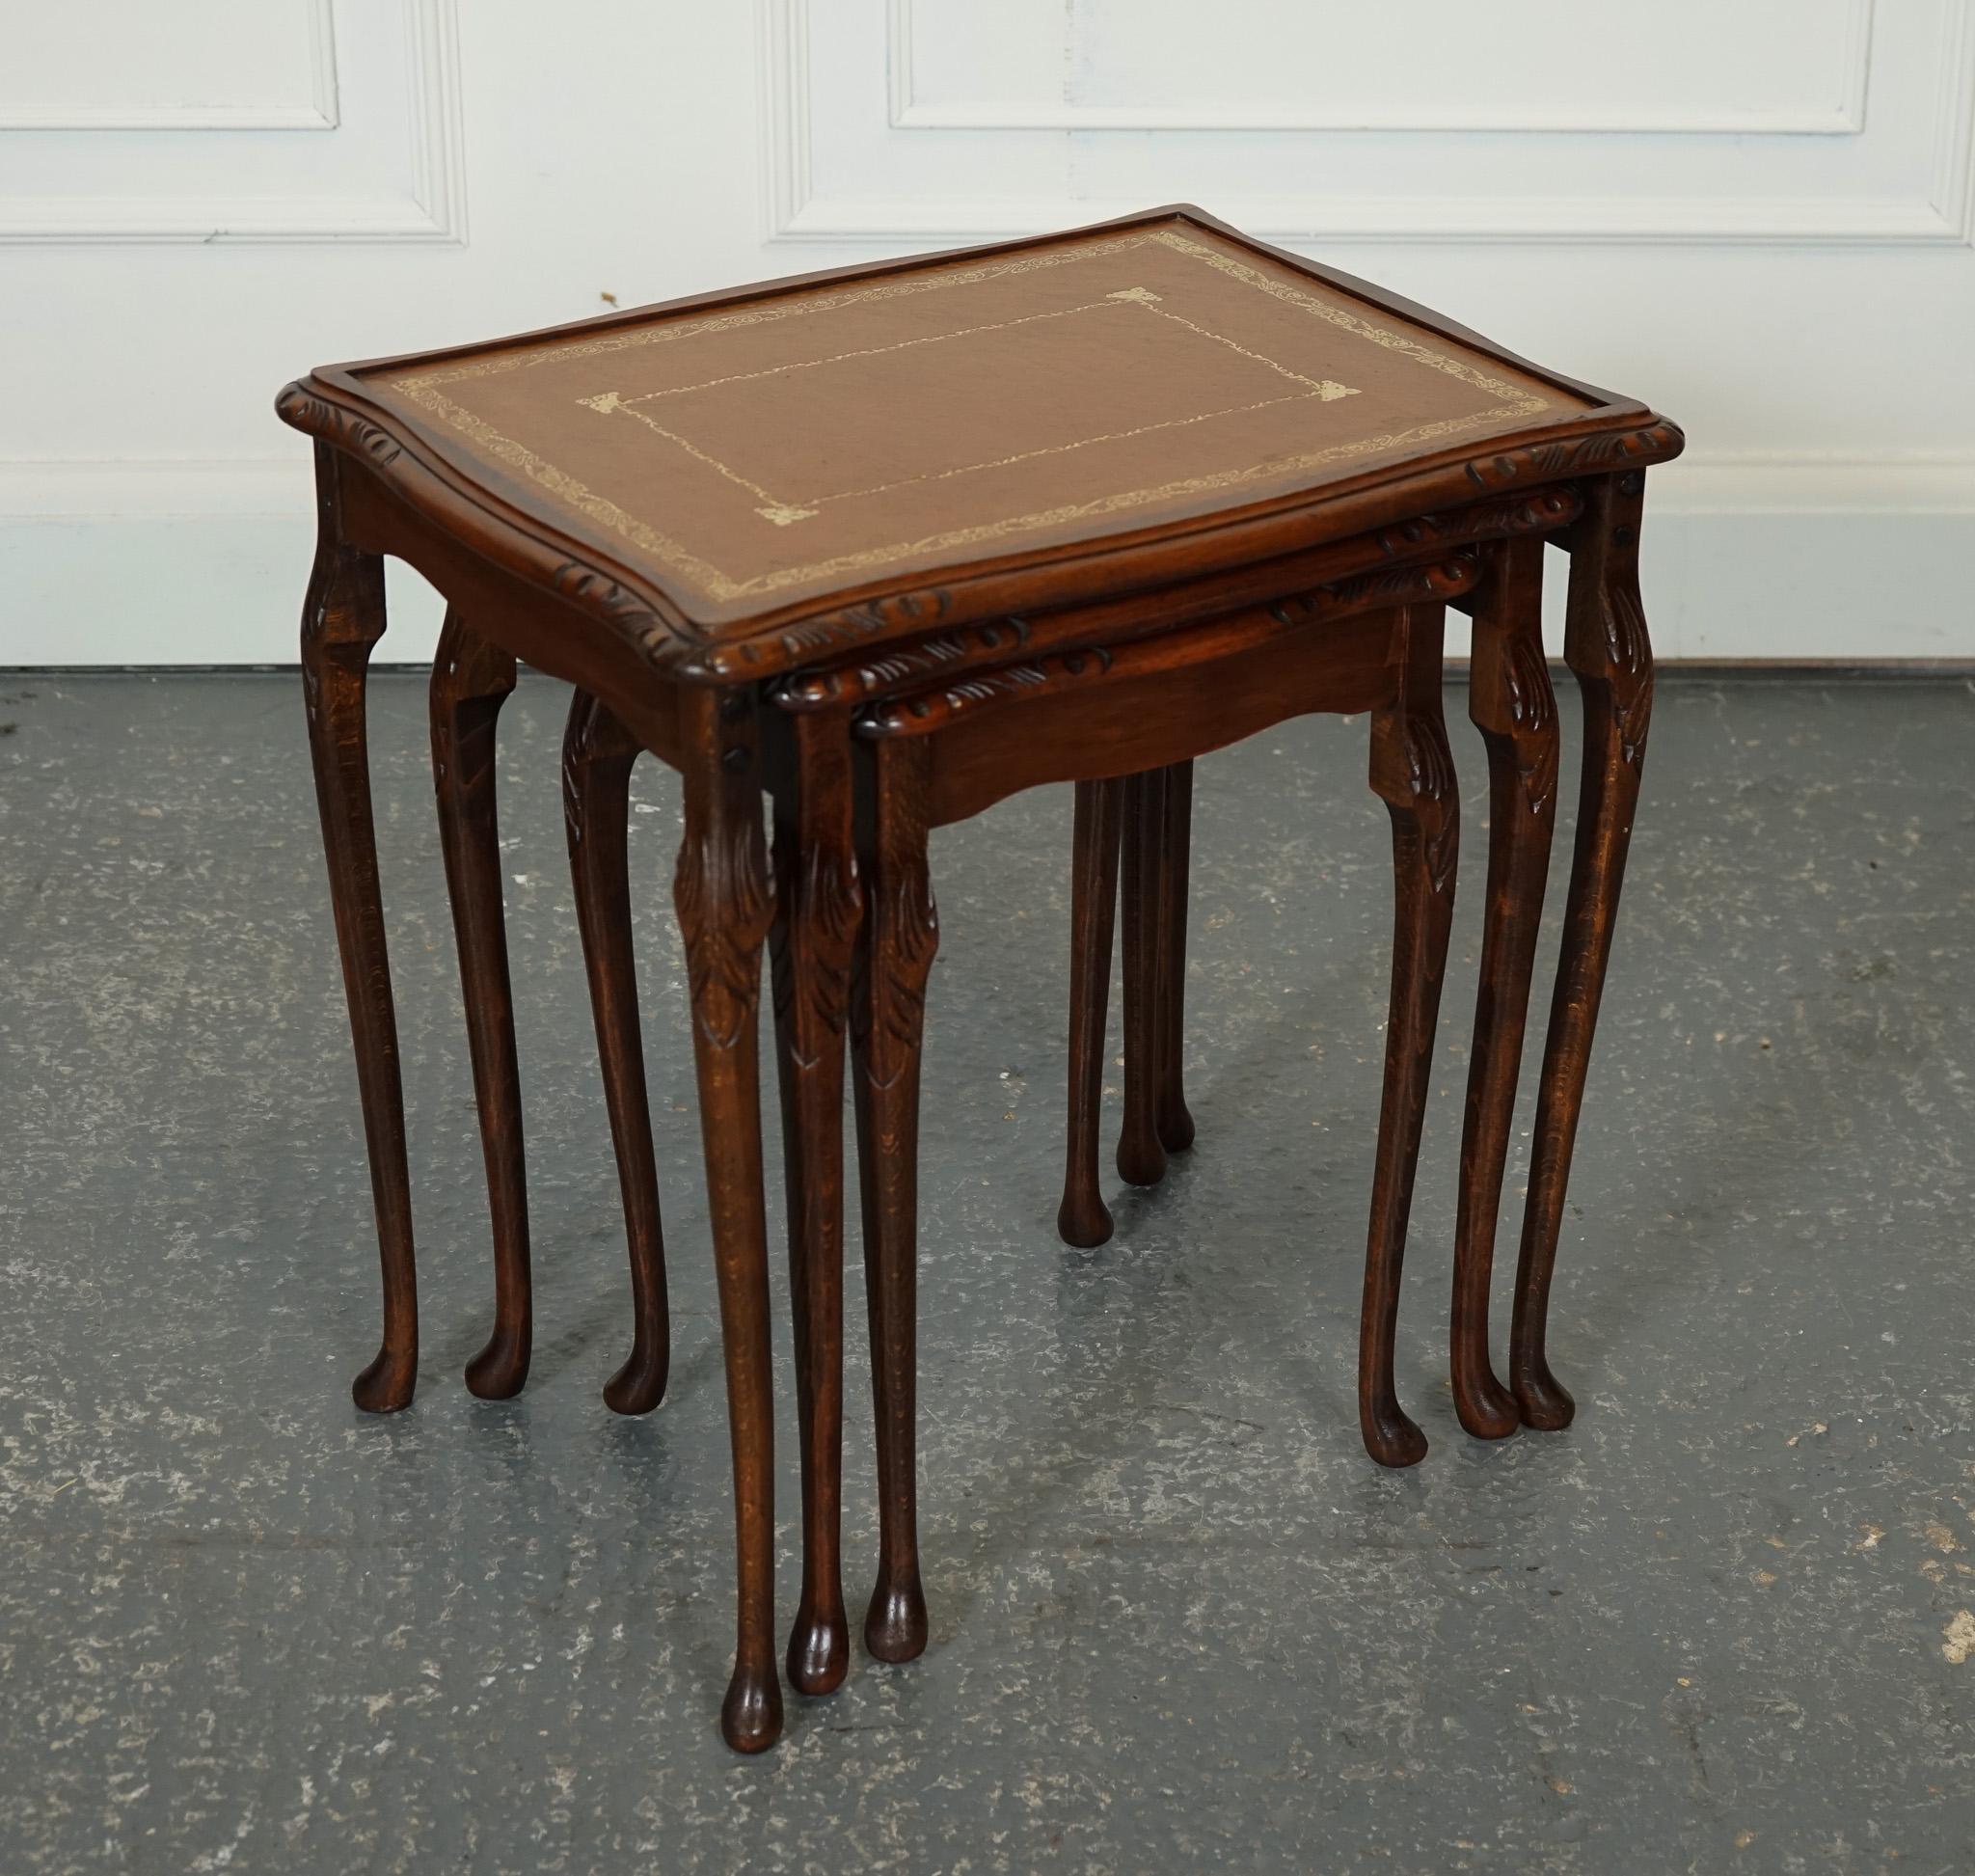 VINTAGE NEST OF TABLES QUEEN ANNE  Style LEGS WiTH BROWN EMBOSsed LEATHER TOP J1 (Handgefertigt) im Angebot